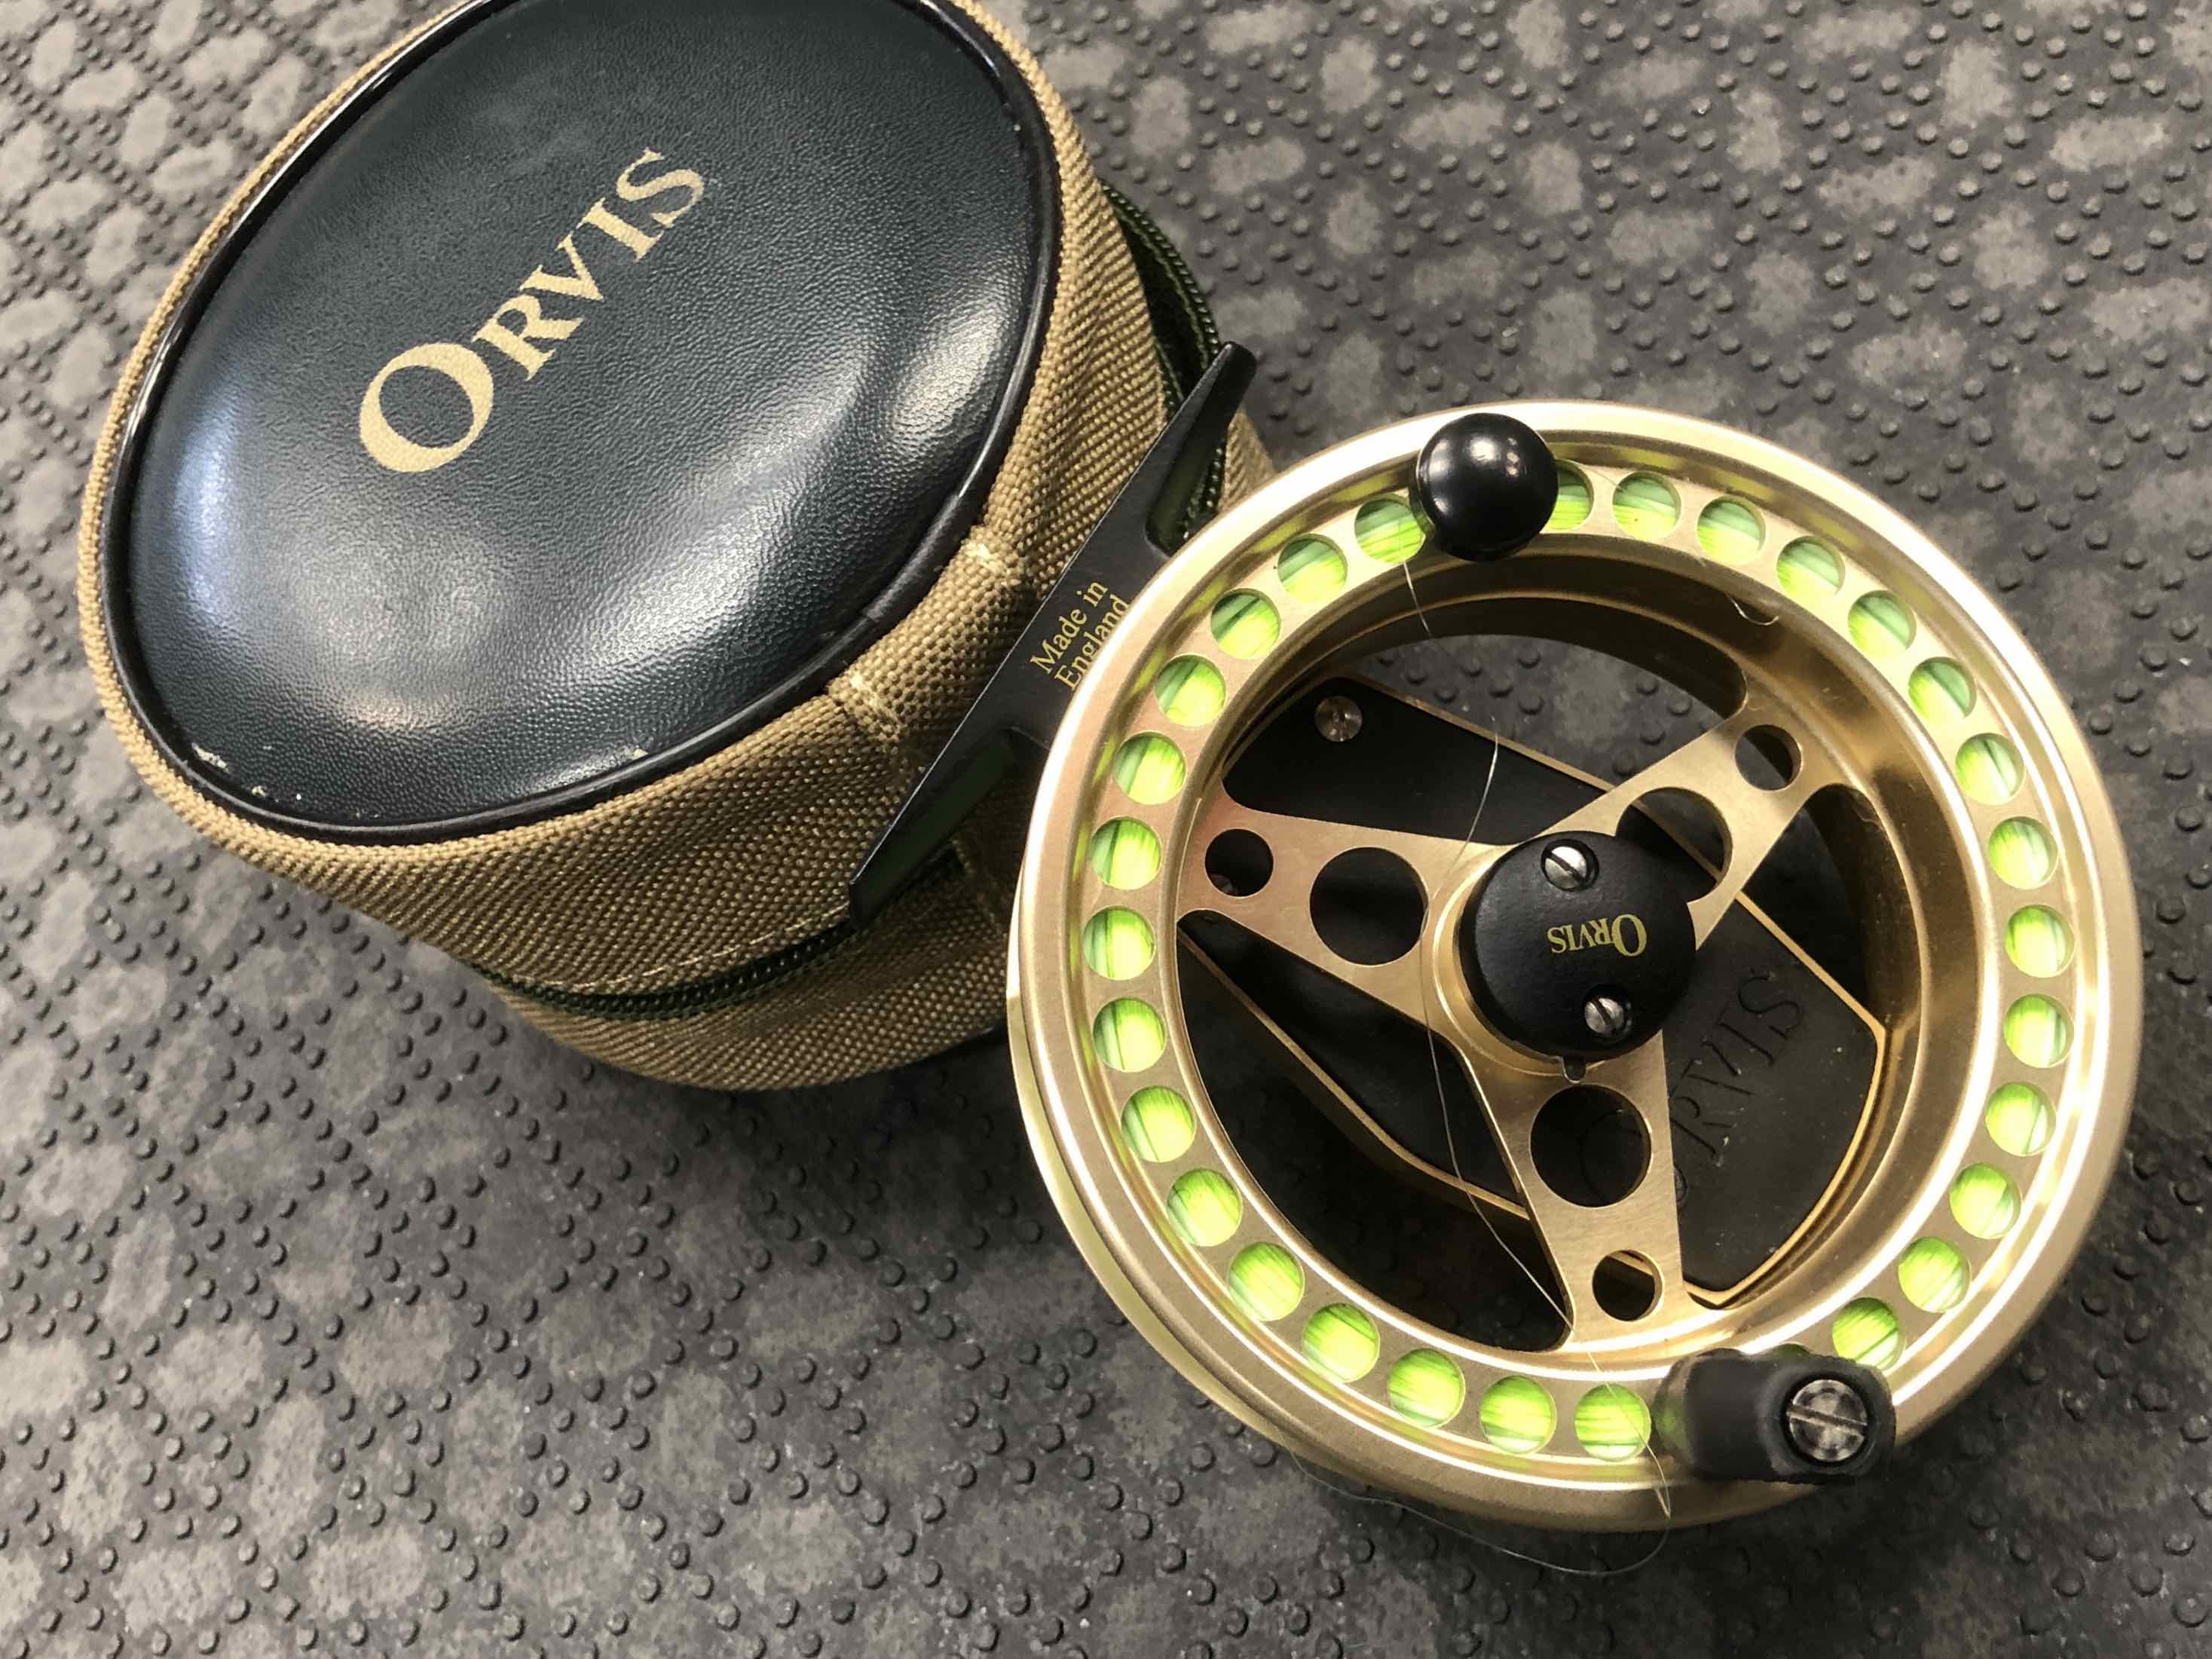 Orvis Battenkill - Made in England - Large Arbour II Fly Reel - Gold - C/W RIO Grand WF4F Fly Line - GREAT SHAPE! - $150